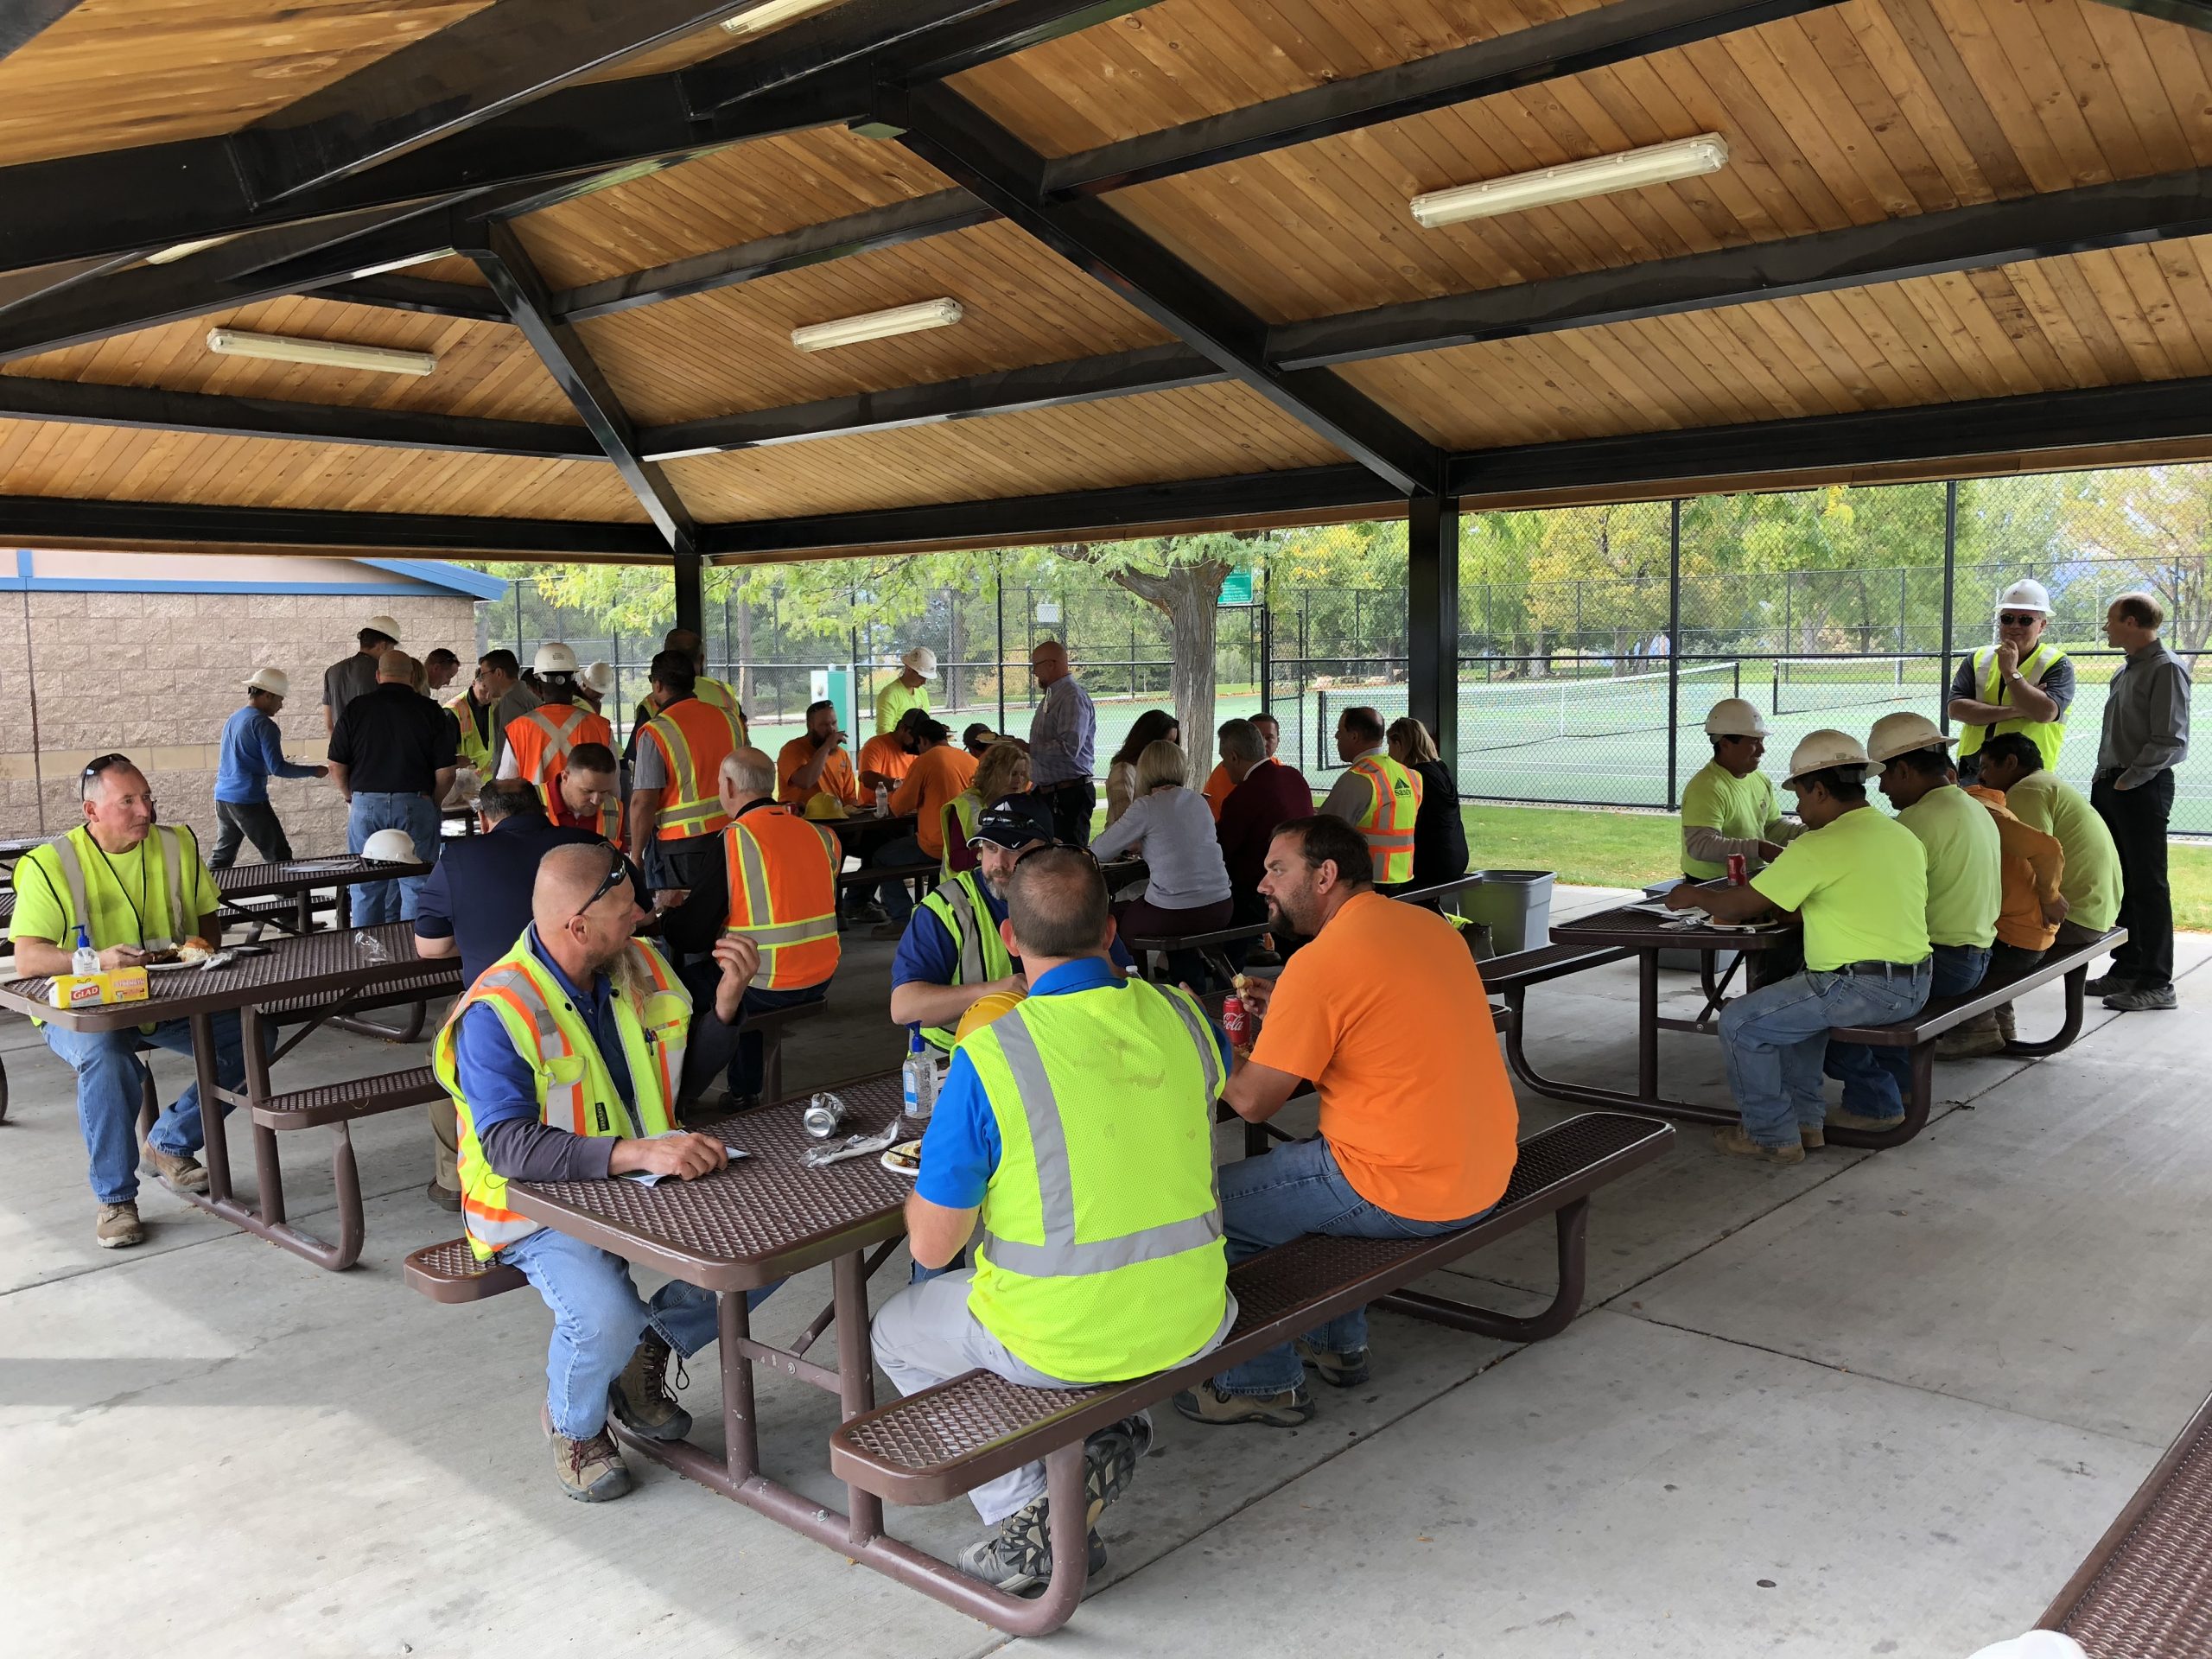 Construction workers sit, talk and eat at metal picnic tables underneath pavilion.